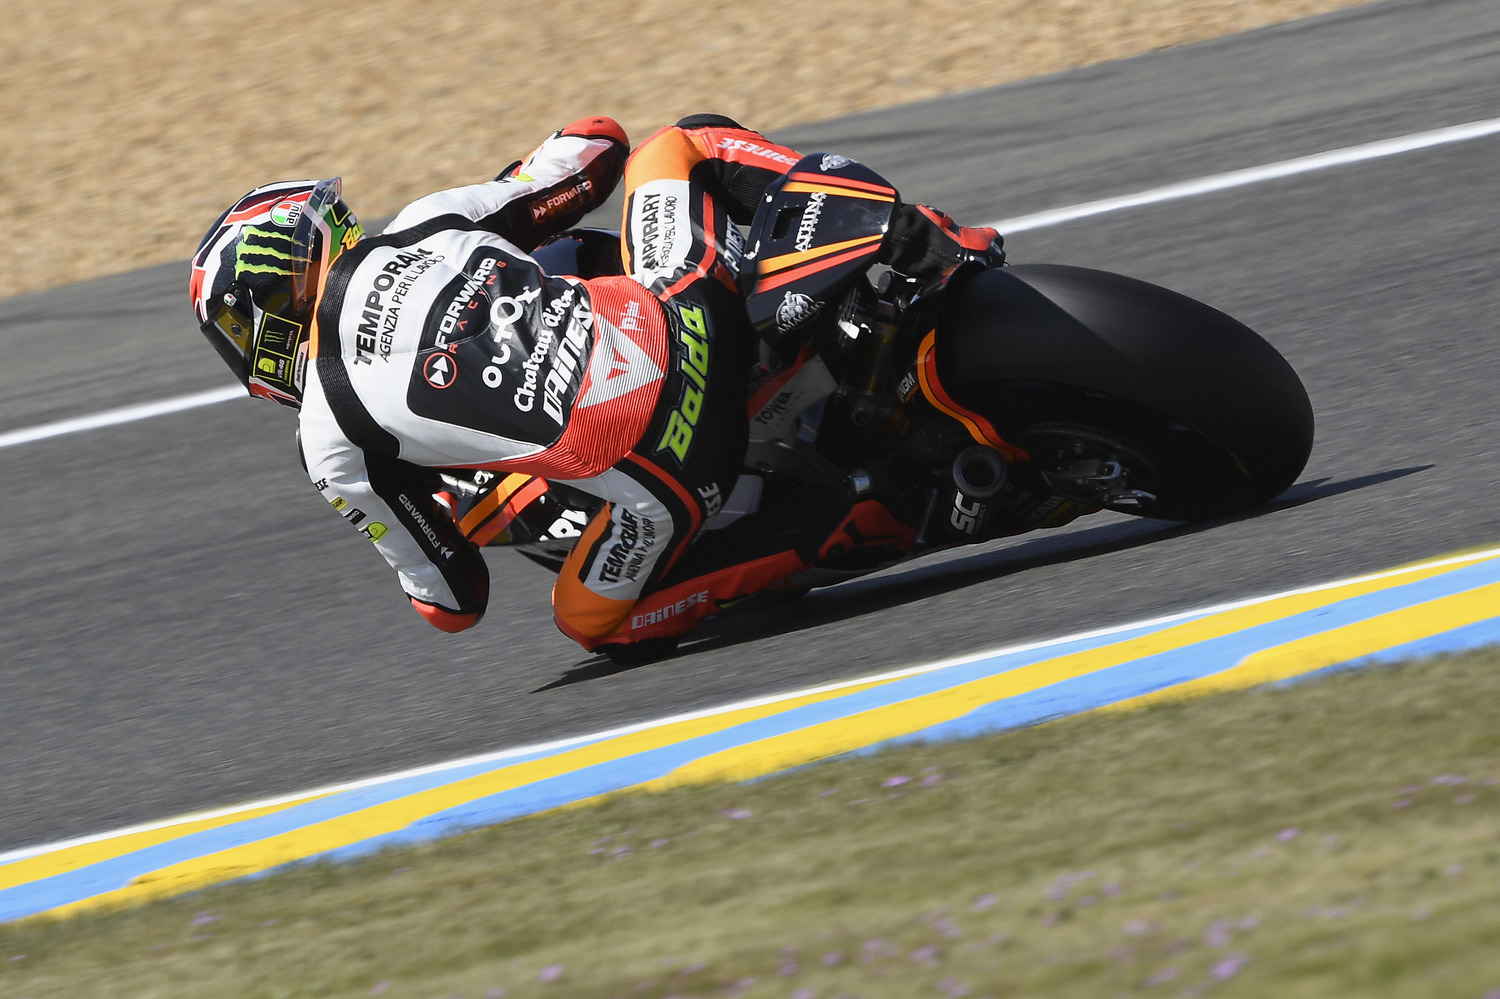 Baldassarri first of the Italians, Marini first time with Moto2 at LeMans